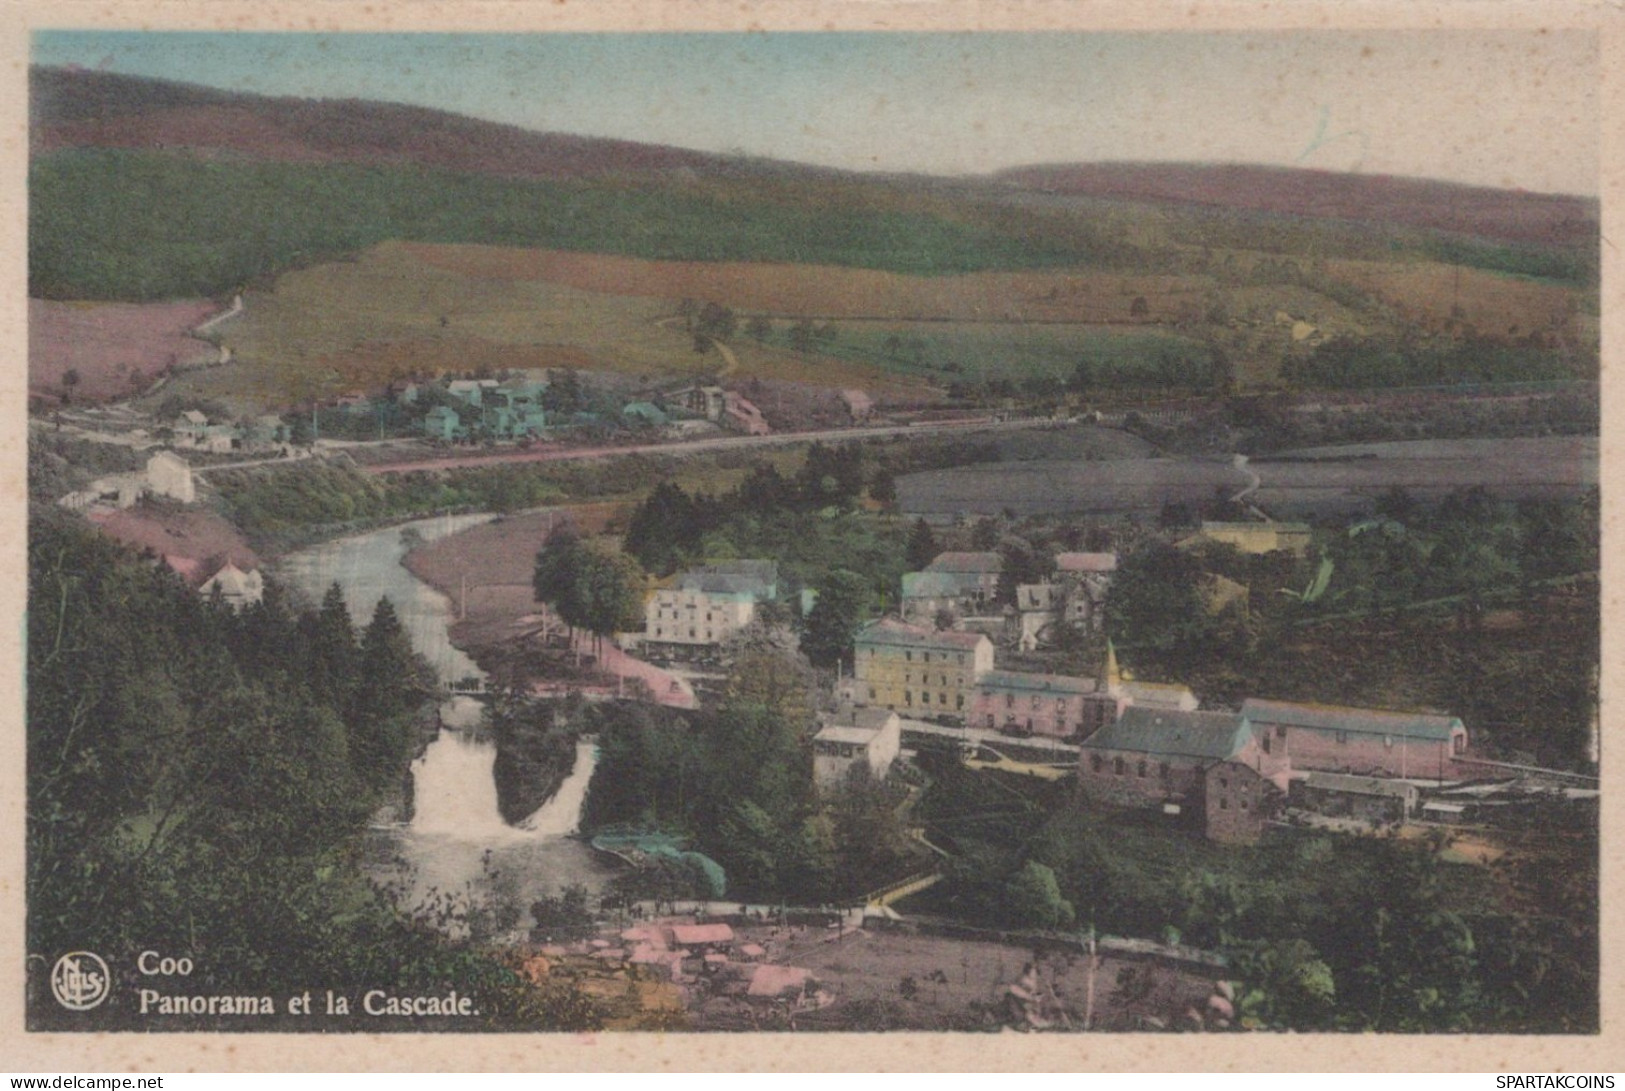 BELGIUM COO WATERFALL Province Of Liège Postcard CPA Unposted #PAD101.A - Stavelot